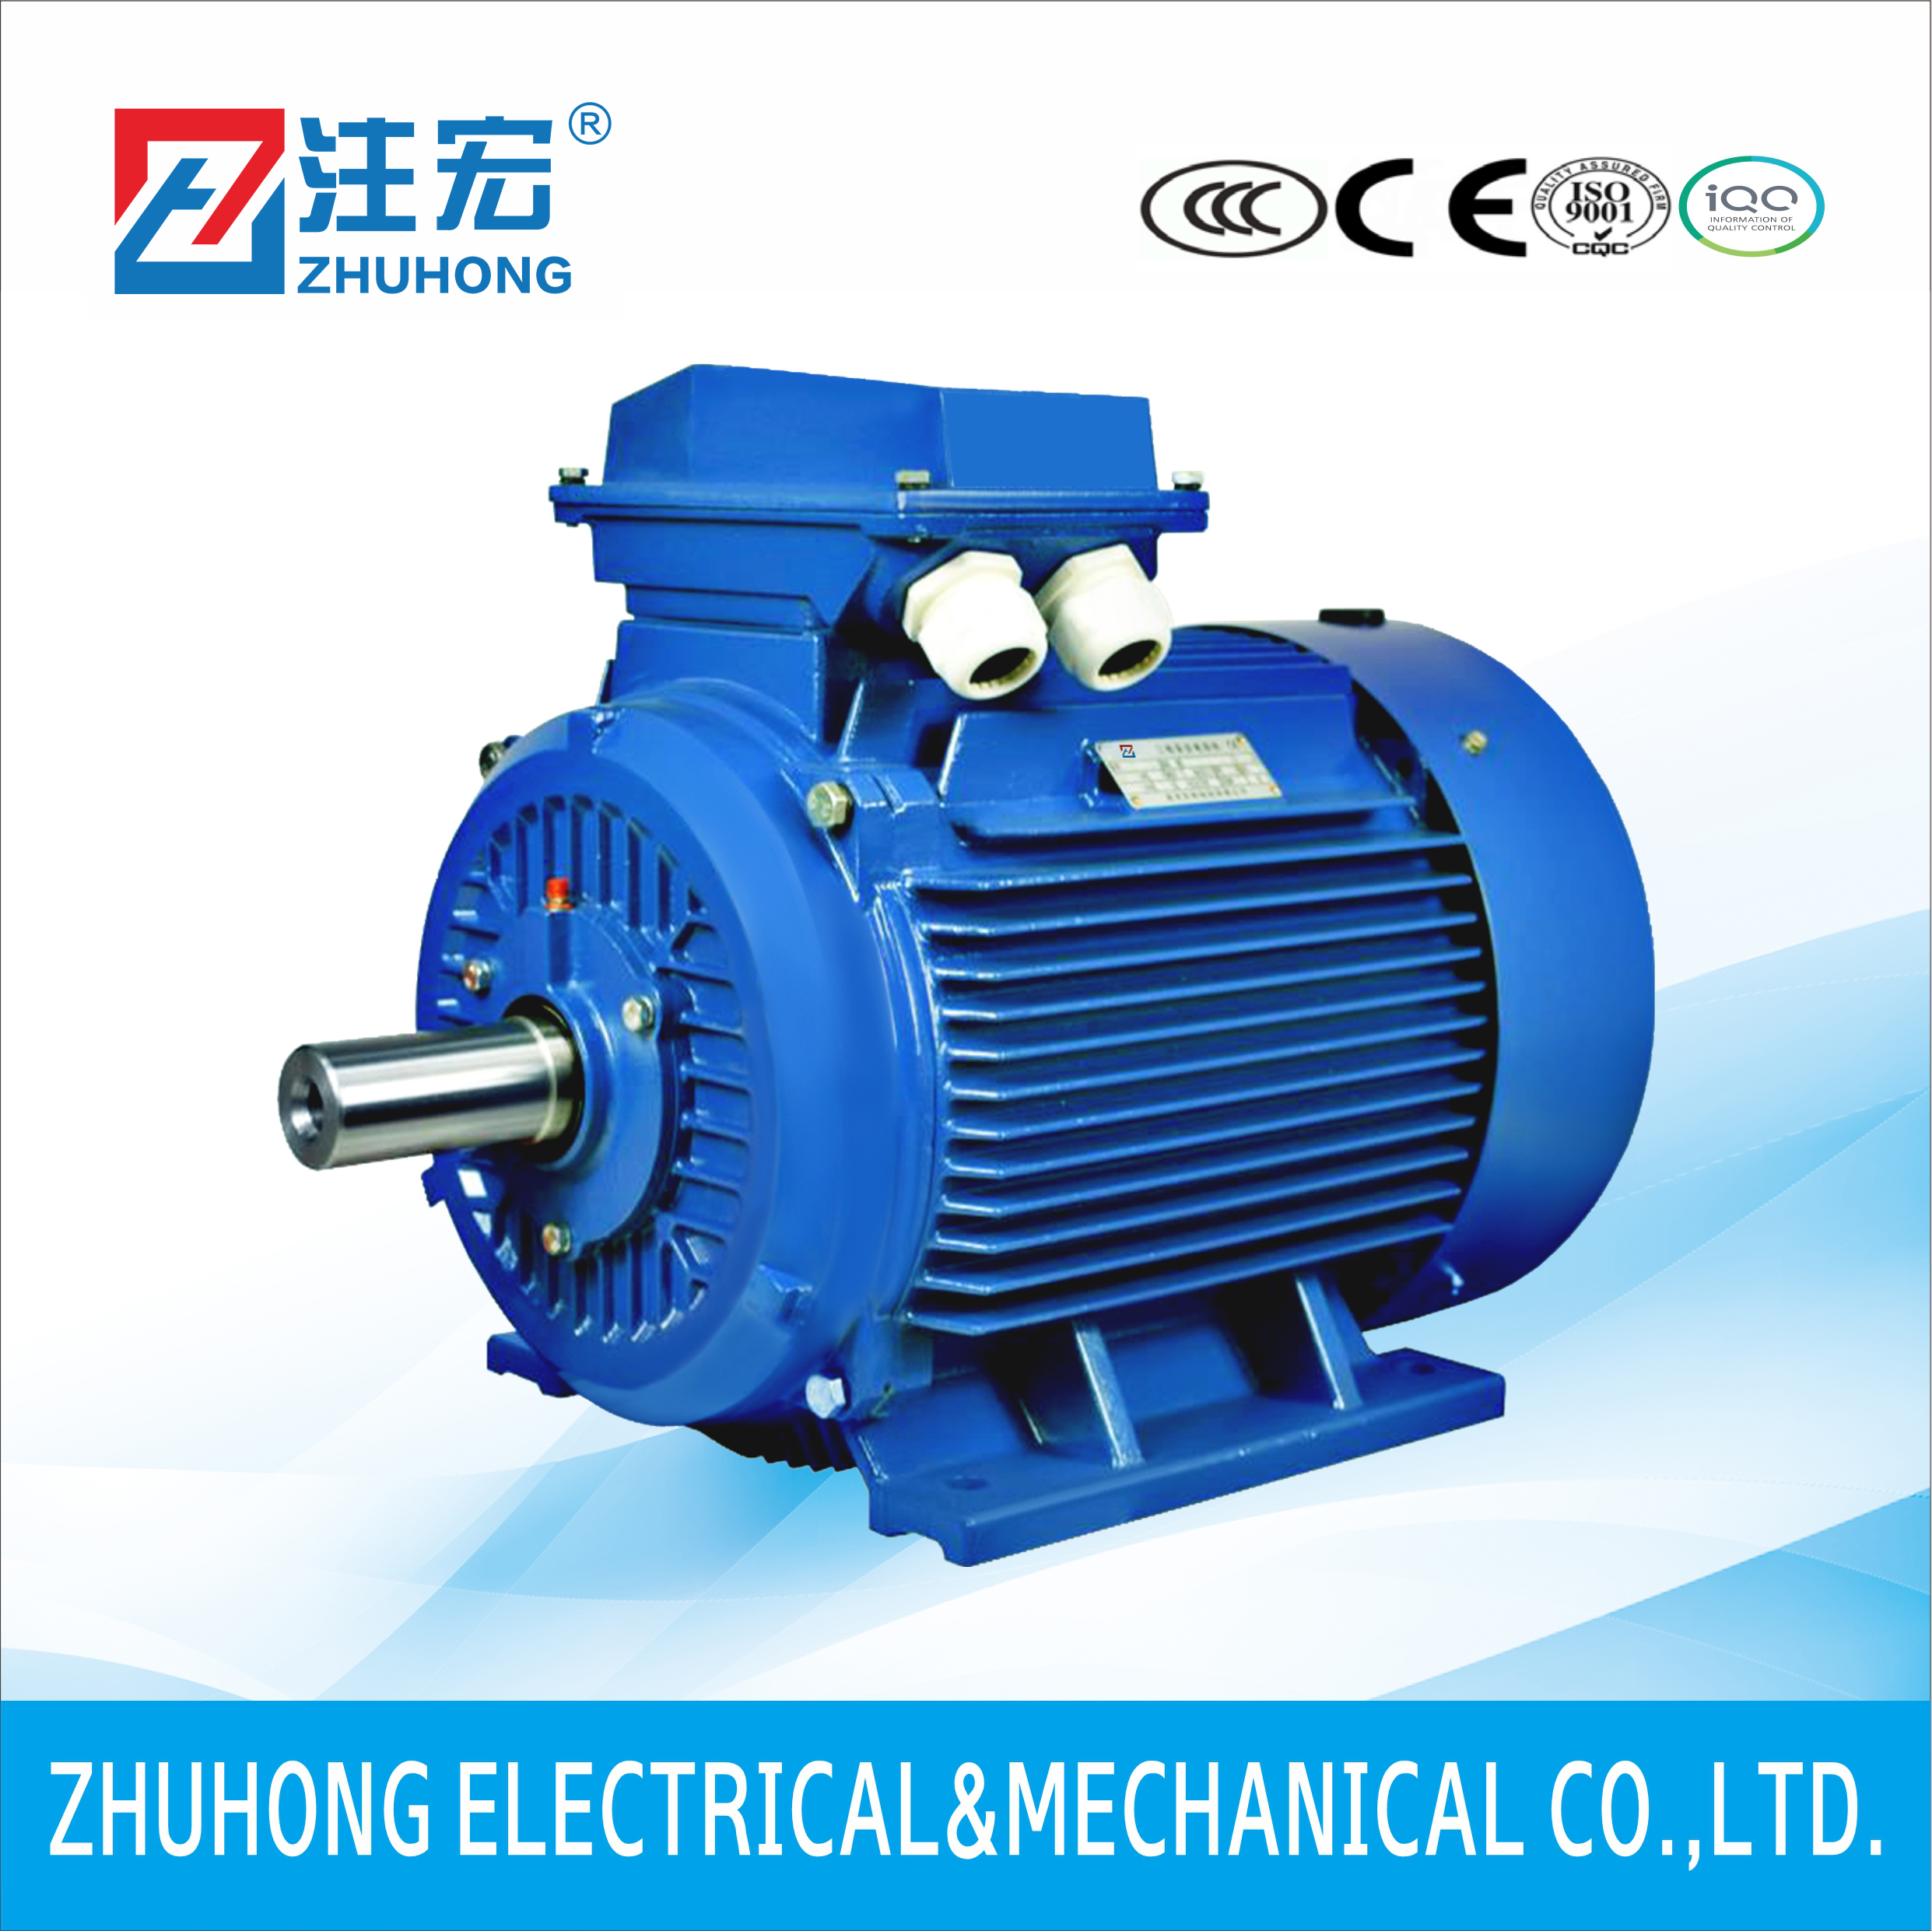 IE3 Series Cast Iron Body Super High Efficiency Three Phase Asynchronous Motor Featured Image